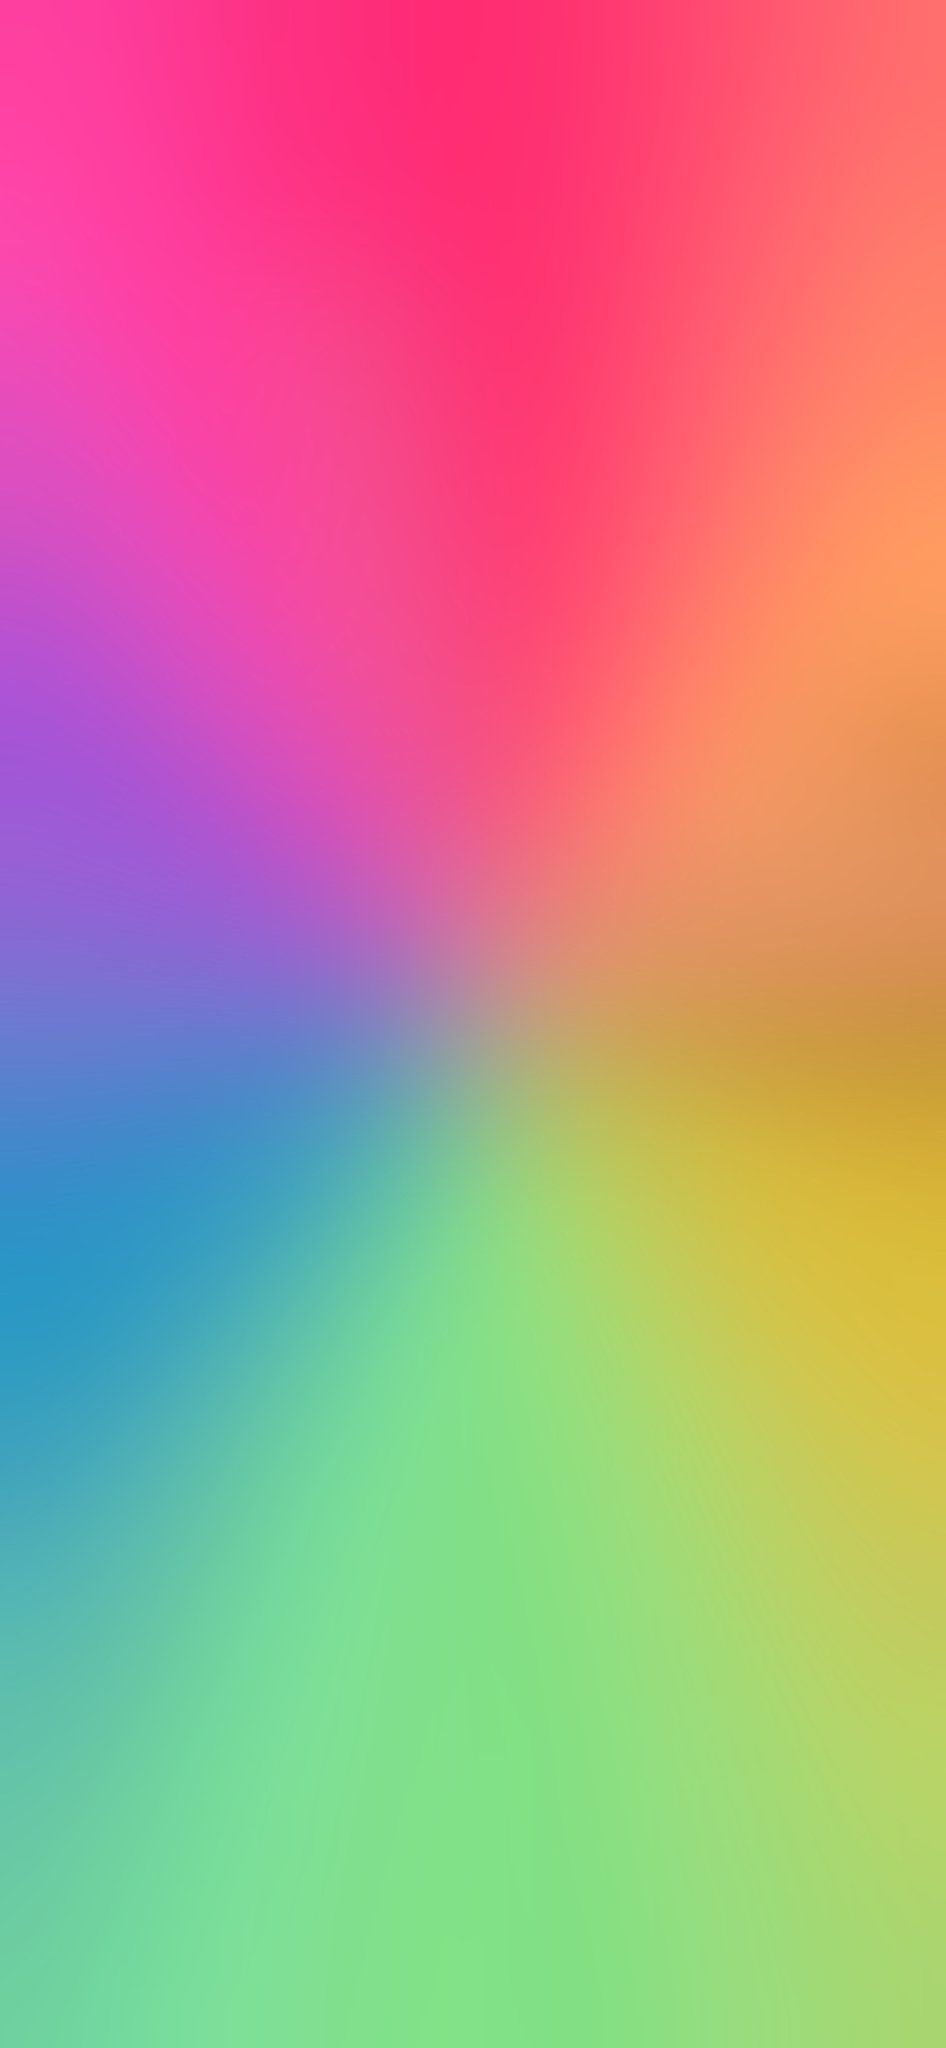 Pride Month wallpaper for your iPhone